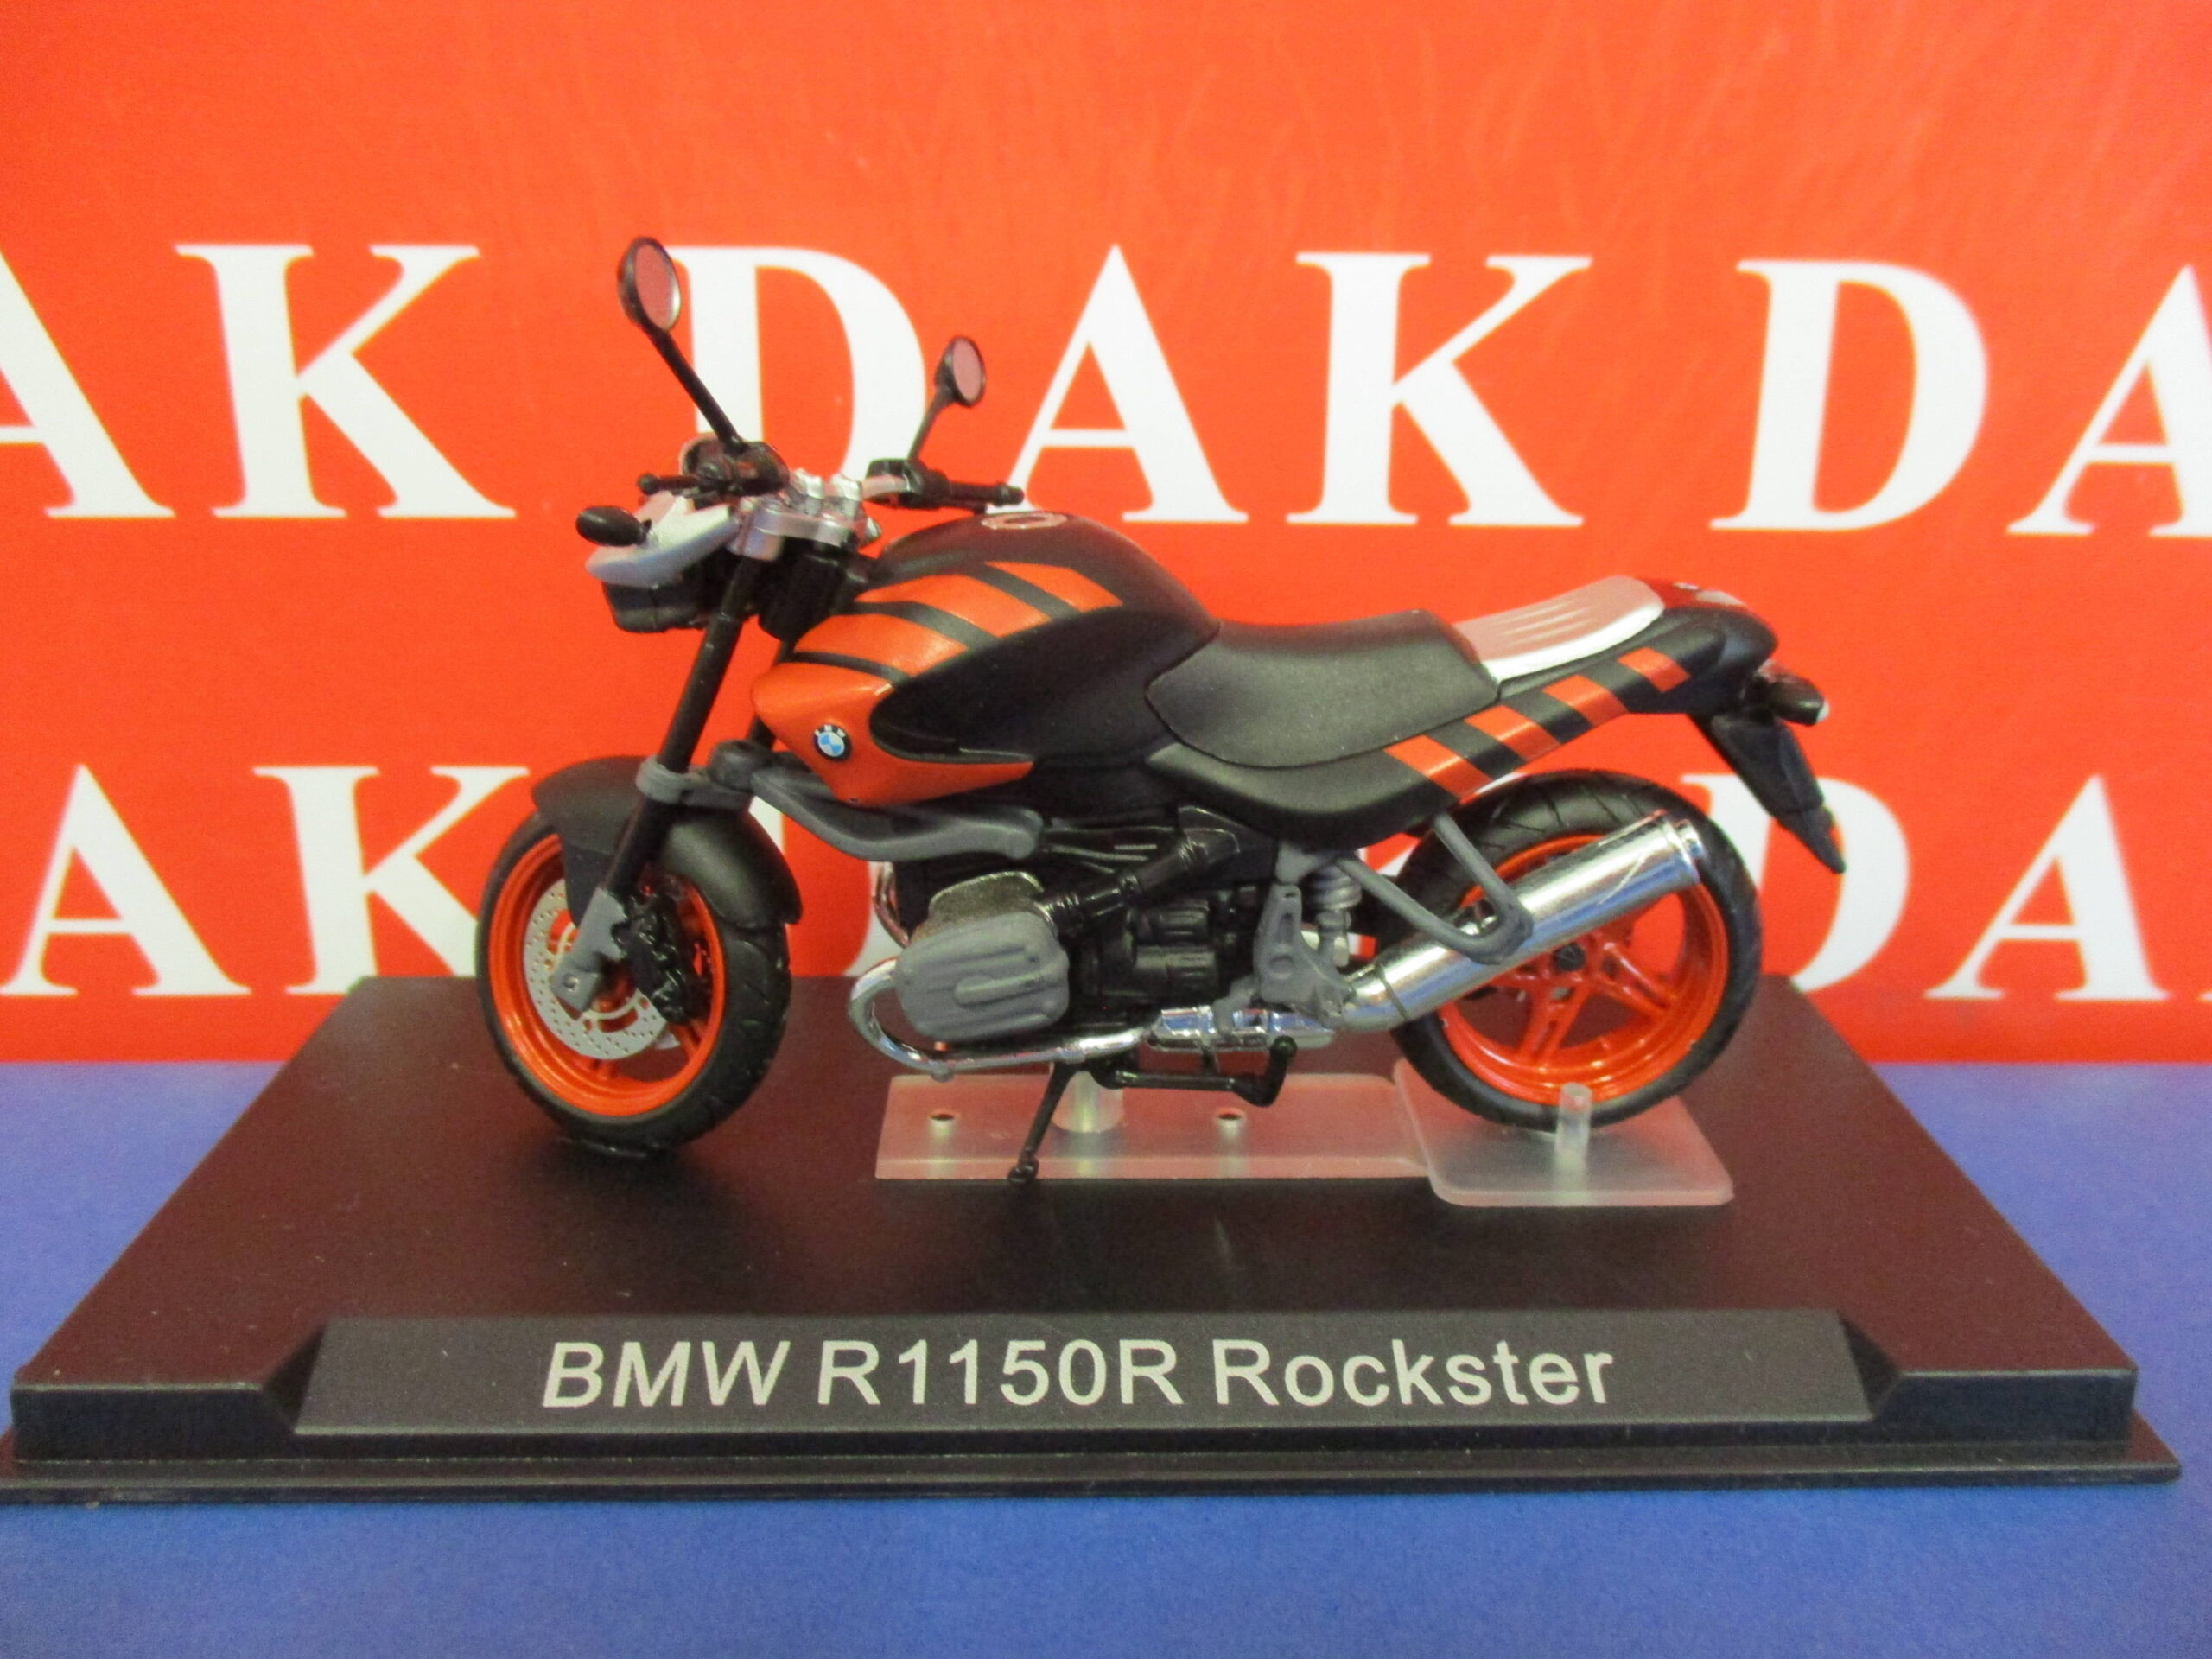 The cast 1/24 model motorcycle BMW R1150R Rockster